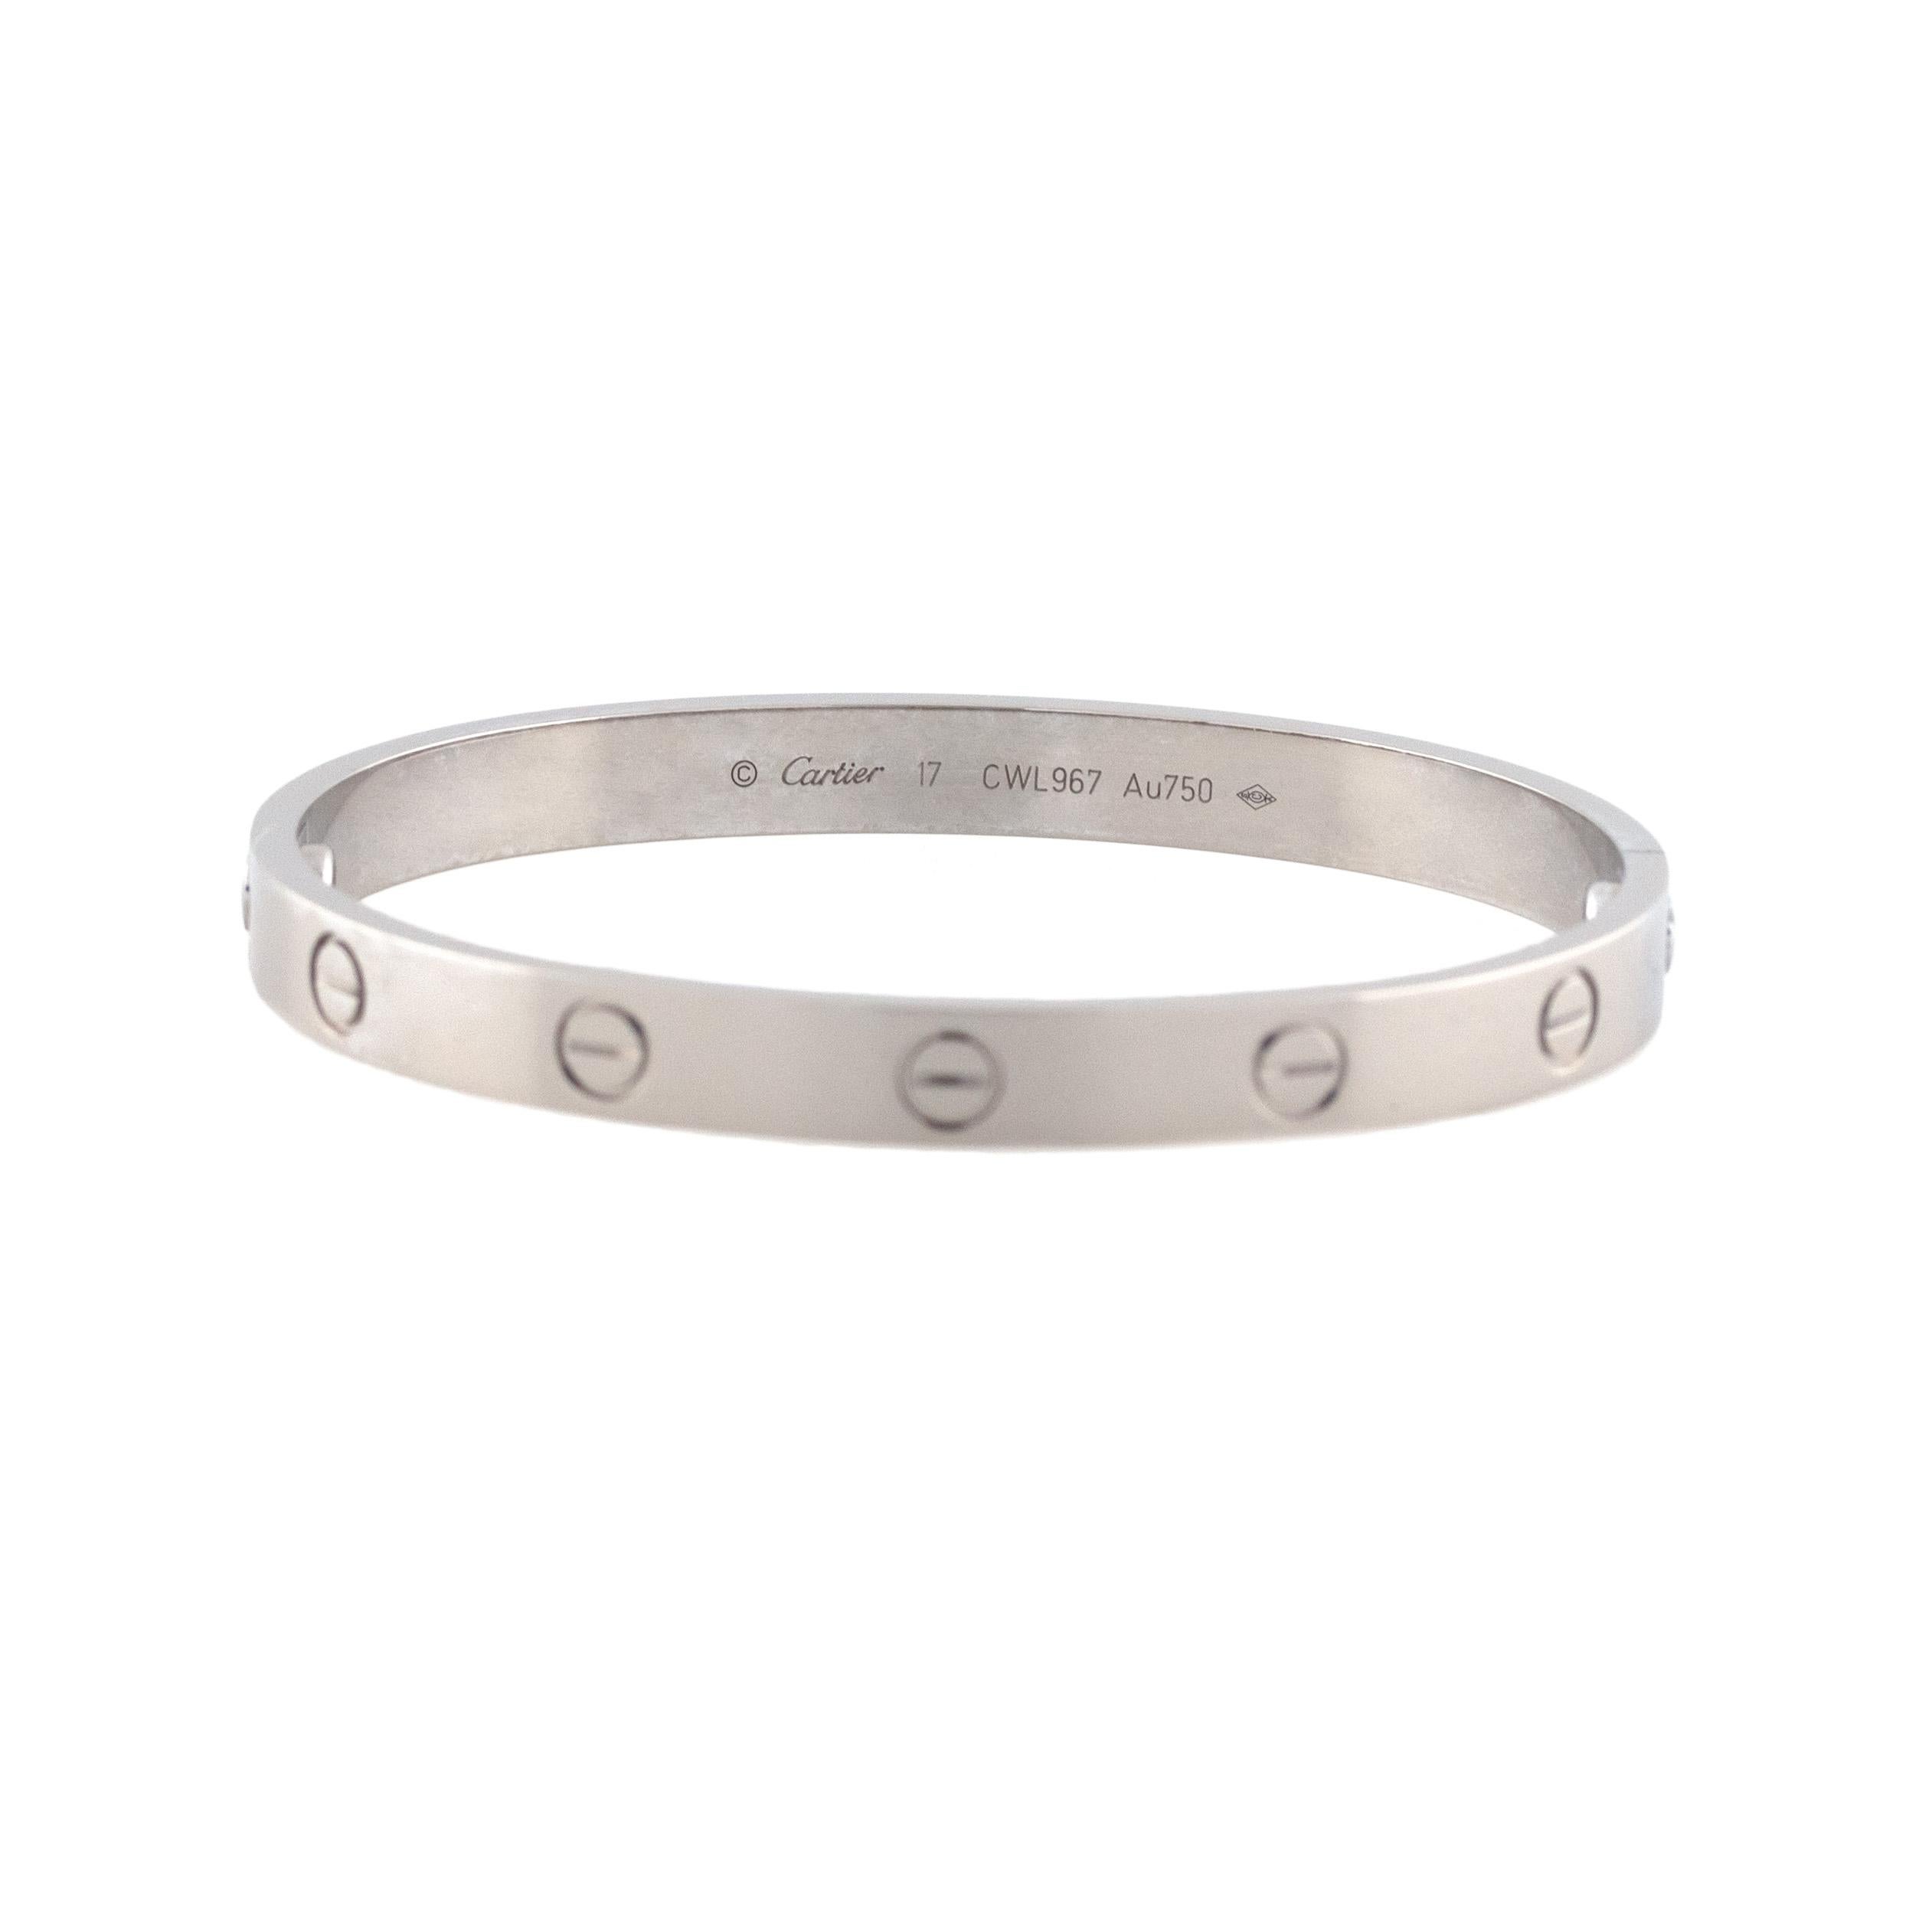 Designer: Cartier
Material: 18k White Gold
Total Weight: 33.9g (21.8dwt)
Bracelet Measurements: Size 17
Clasp Details: Screw - New Style
Additional Details: This item comes with Cartier Service Box
SKU: G9777